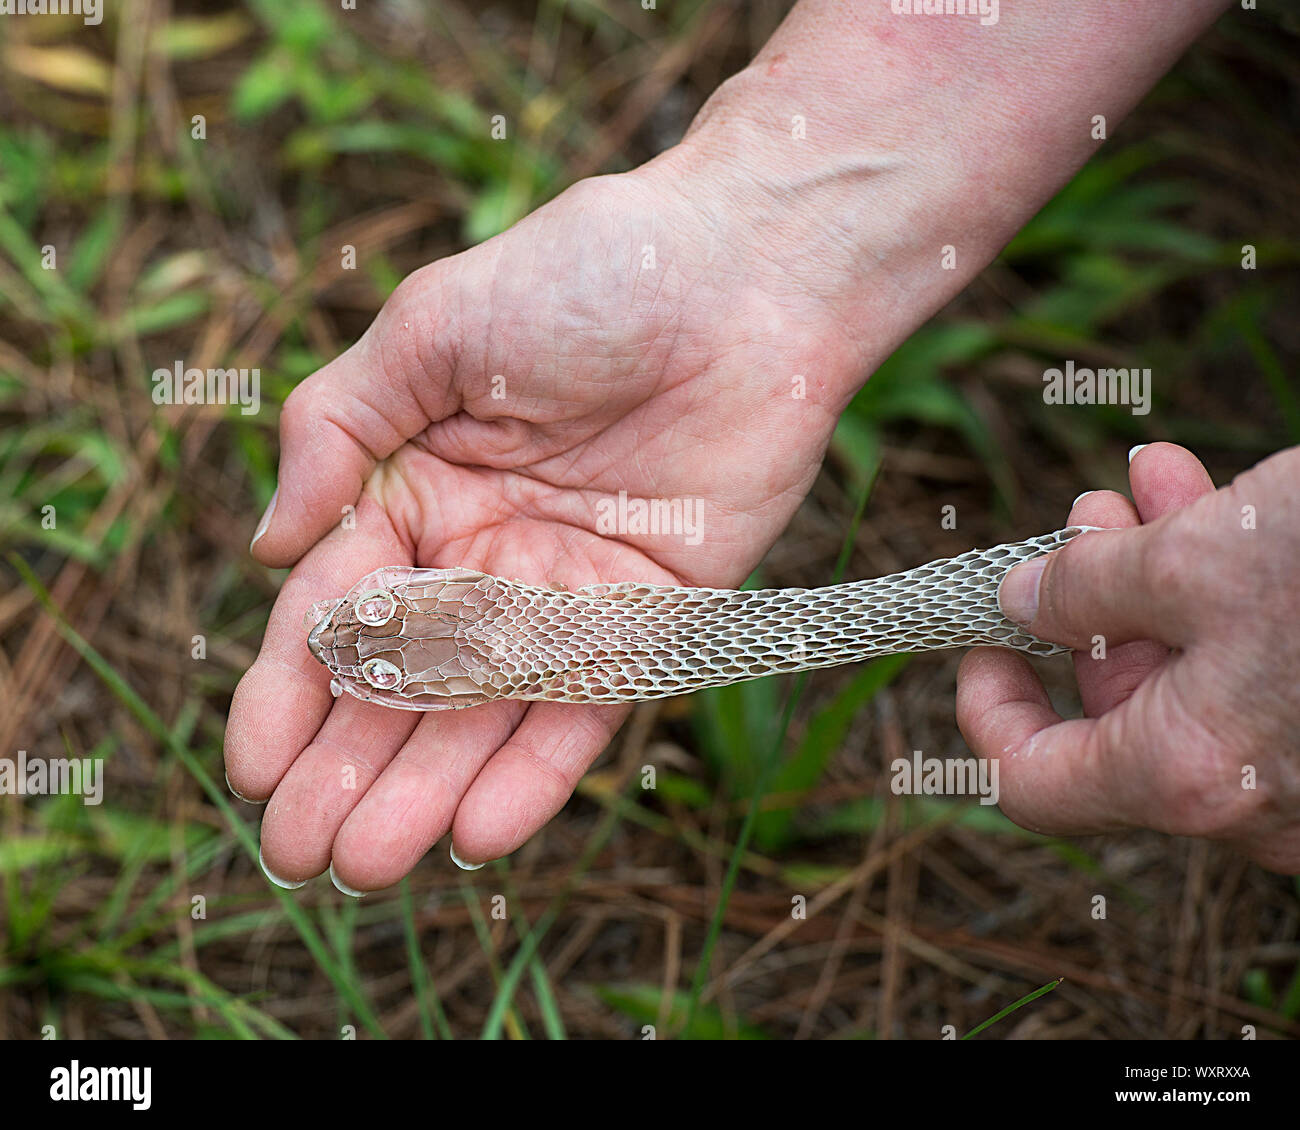 Snake Shedding Skin on a human hand in its surrounding with a background of grass. Stock Photo